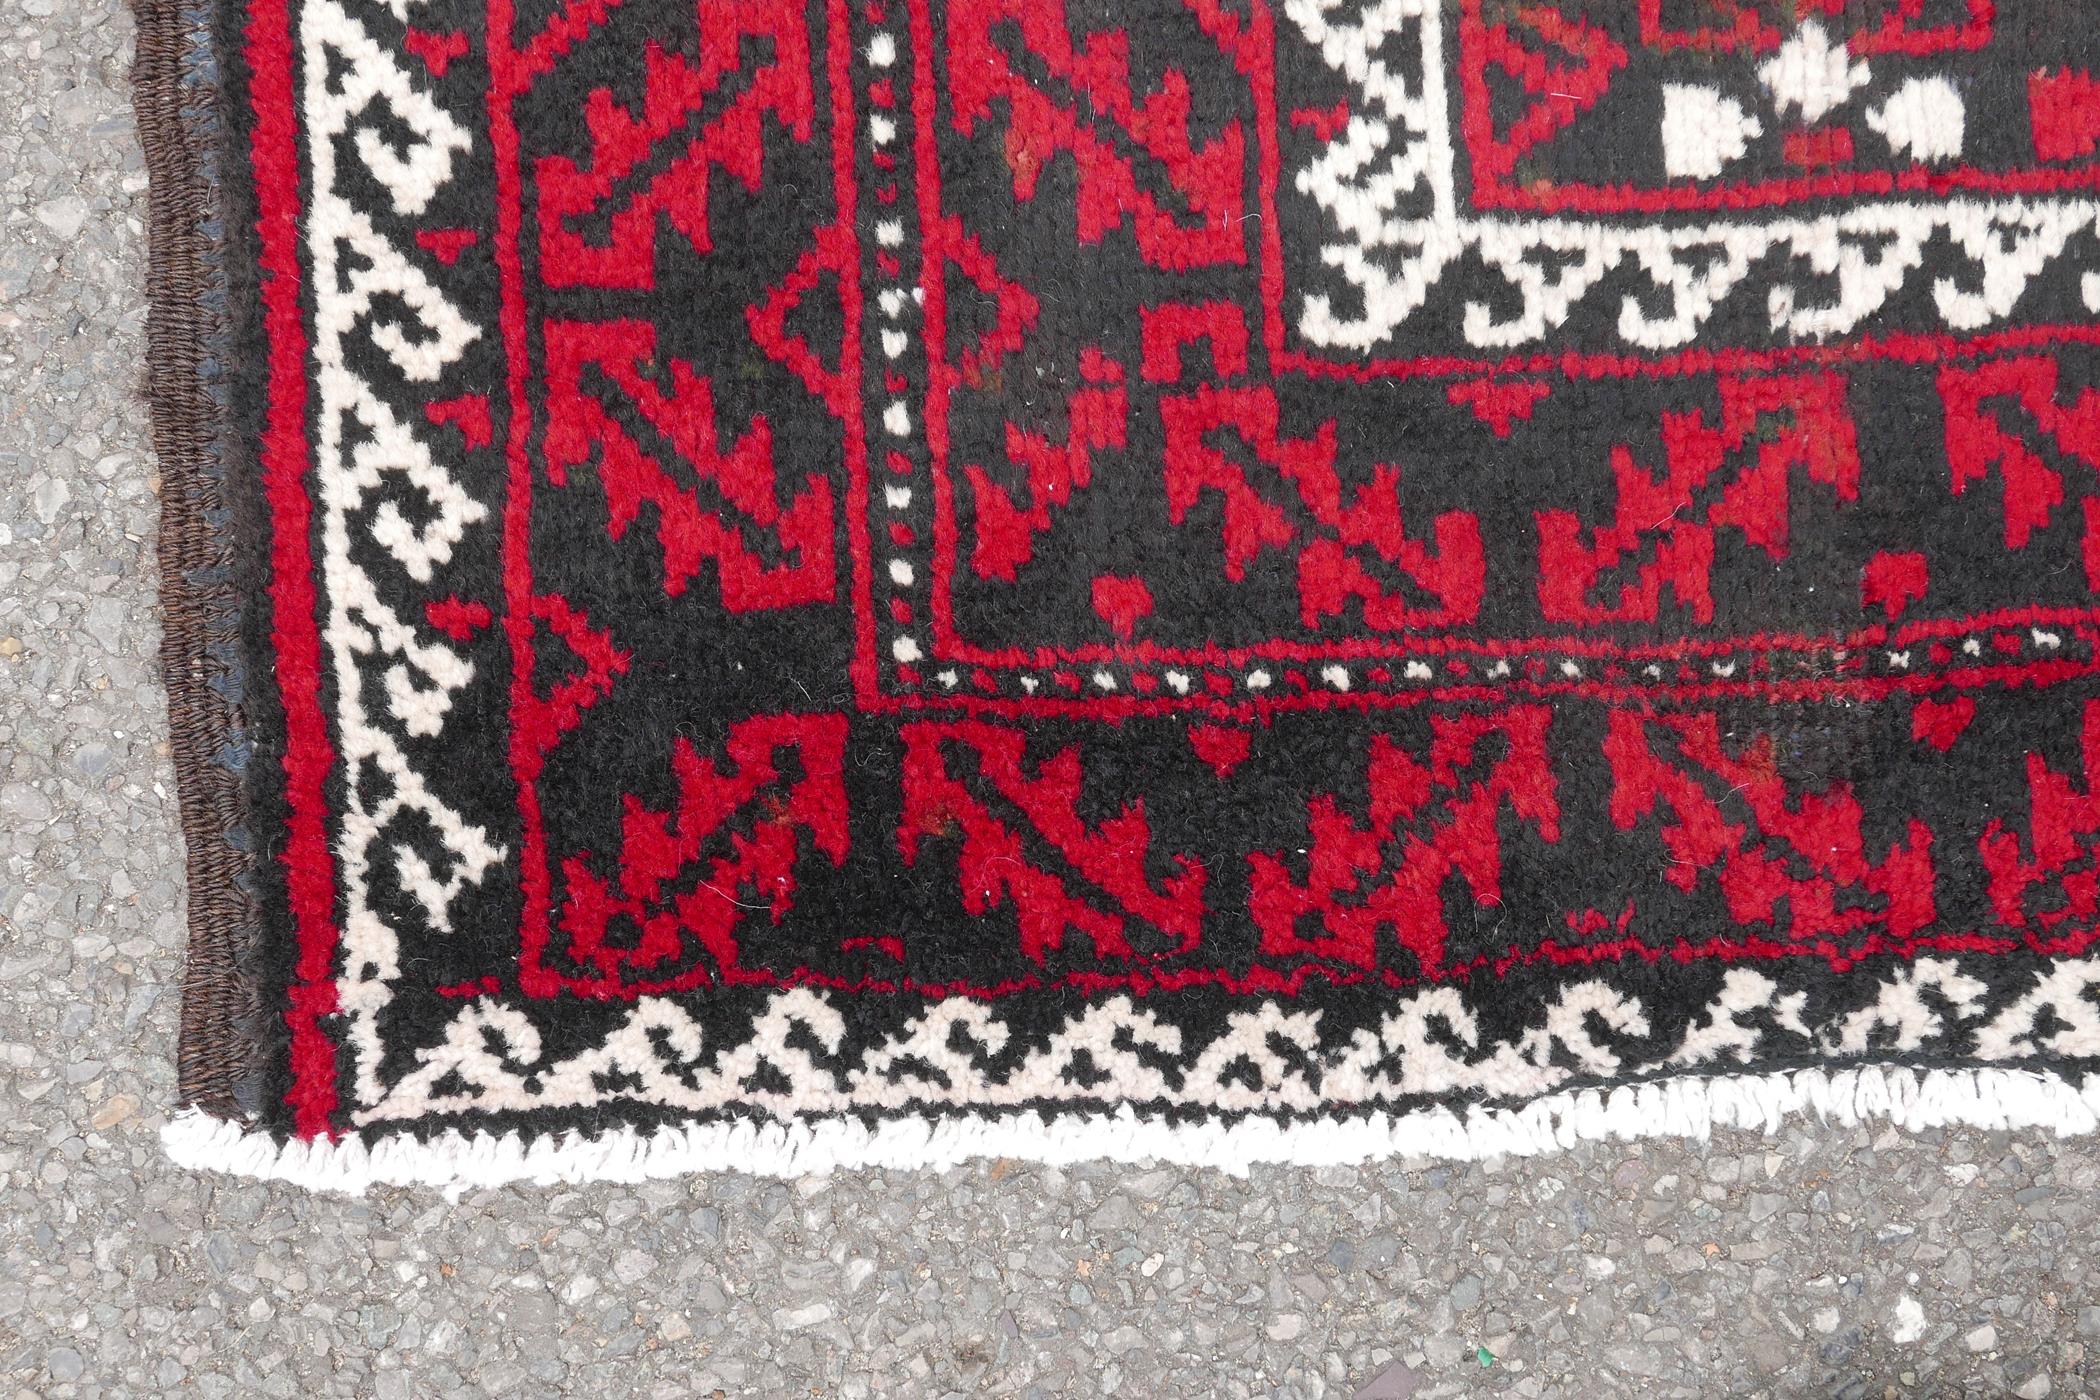 Hand woven full pile red and black ground Iranian Belouch rug, 50½" x 110" - Image 4 of 5